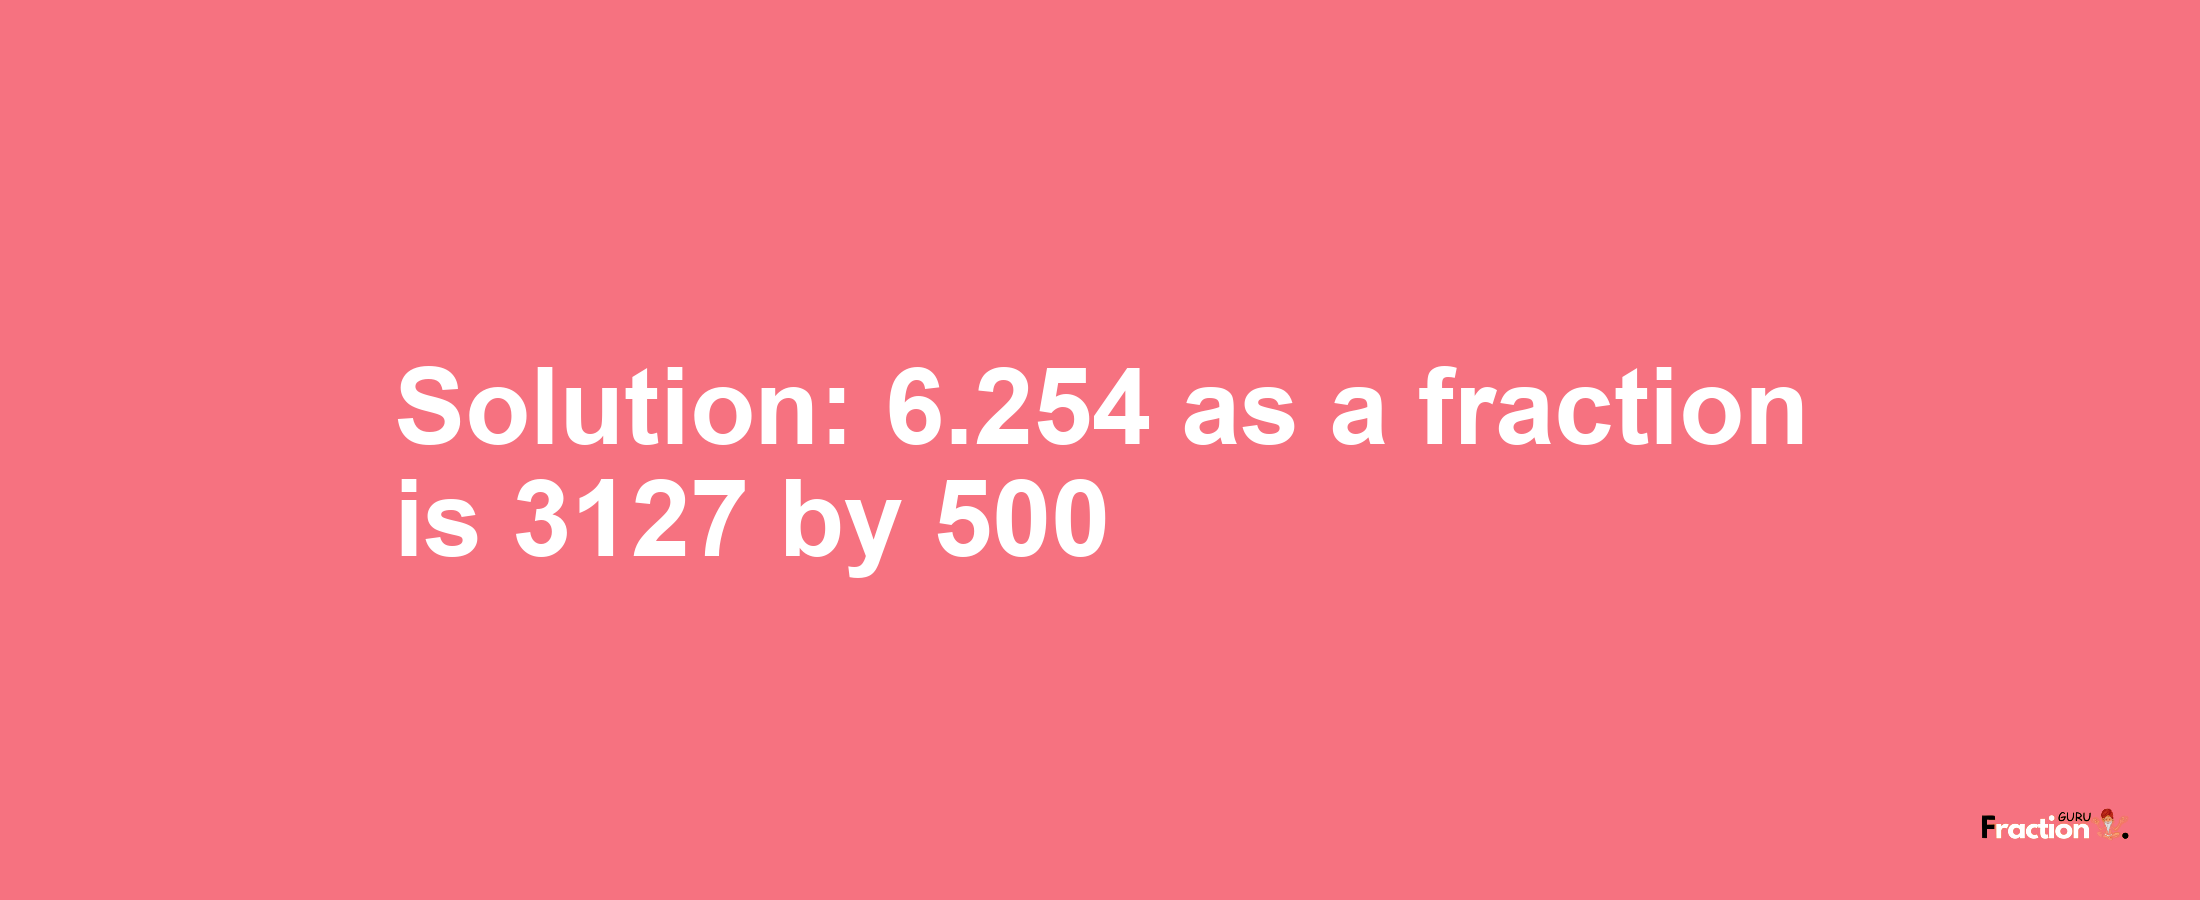 Solution:6.254 as a fraction is 3127/500